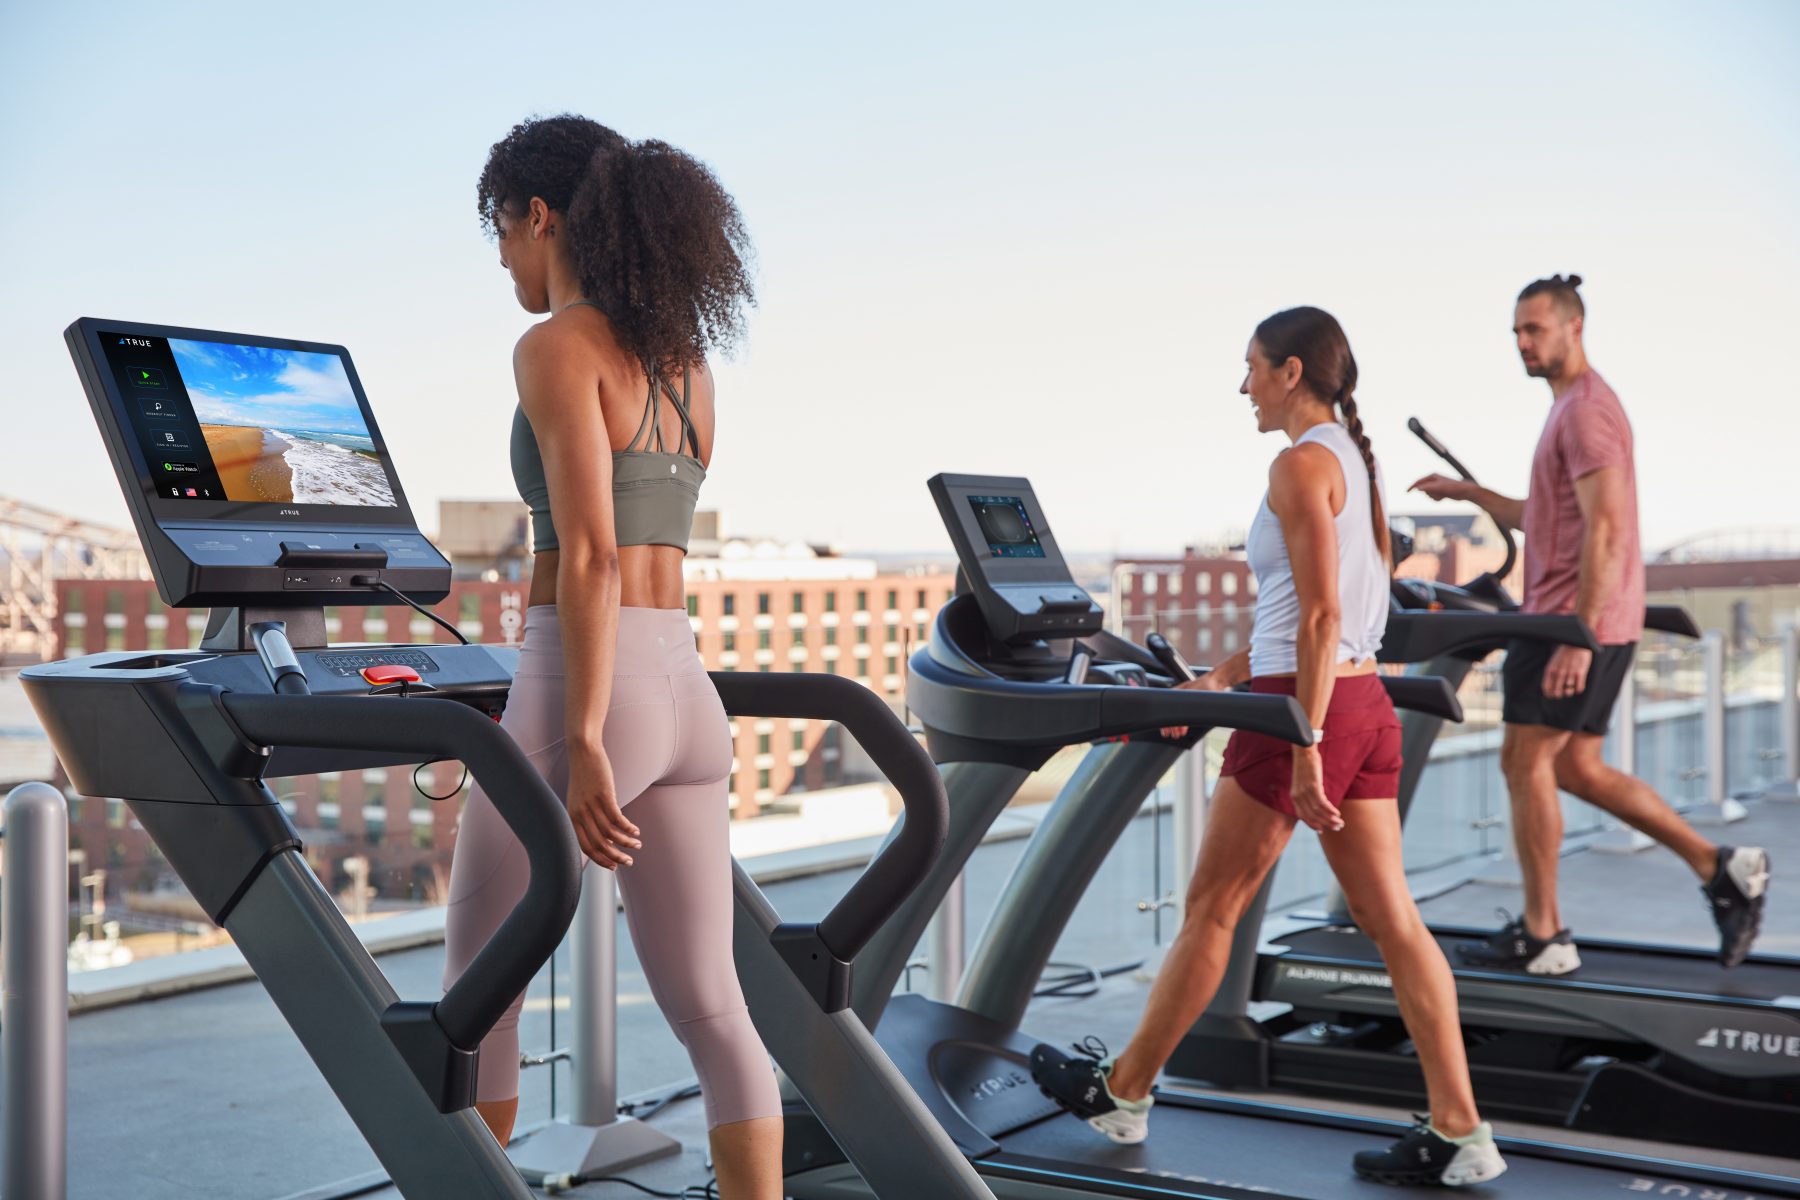 Commercial treadmills being used on a rooftop facility.